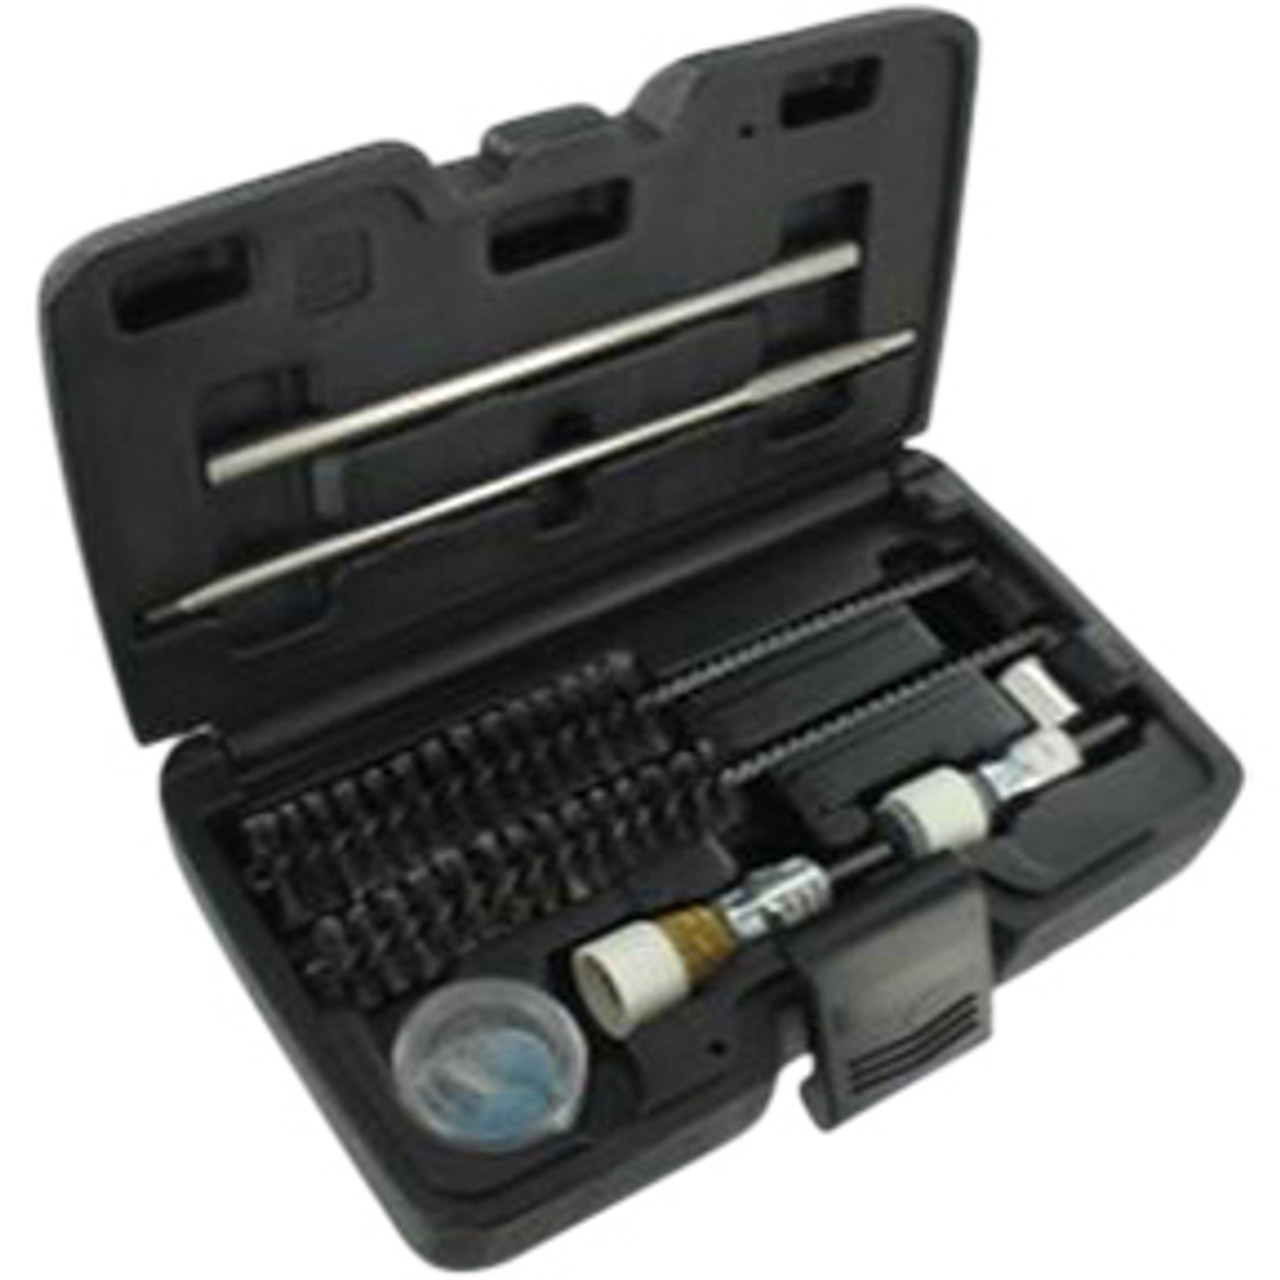 Injector Seat & Chamber Cleaning Set